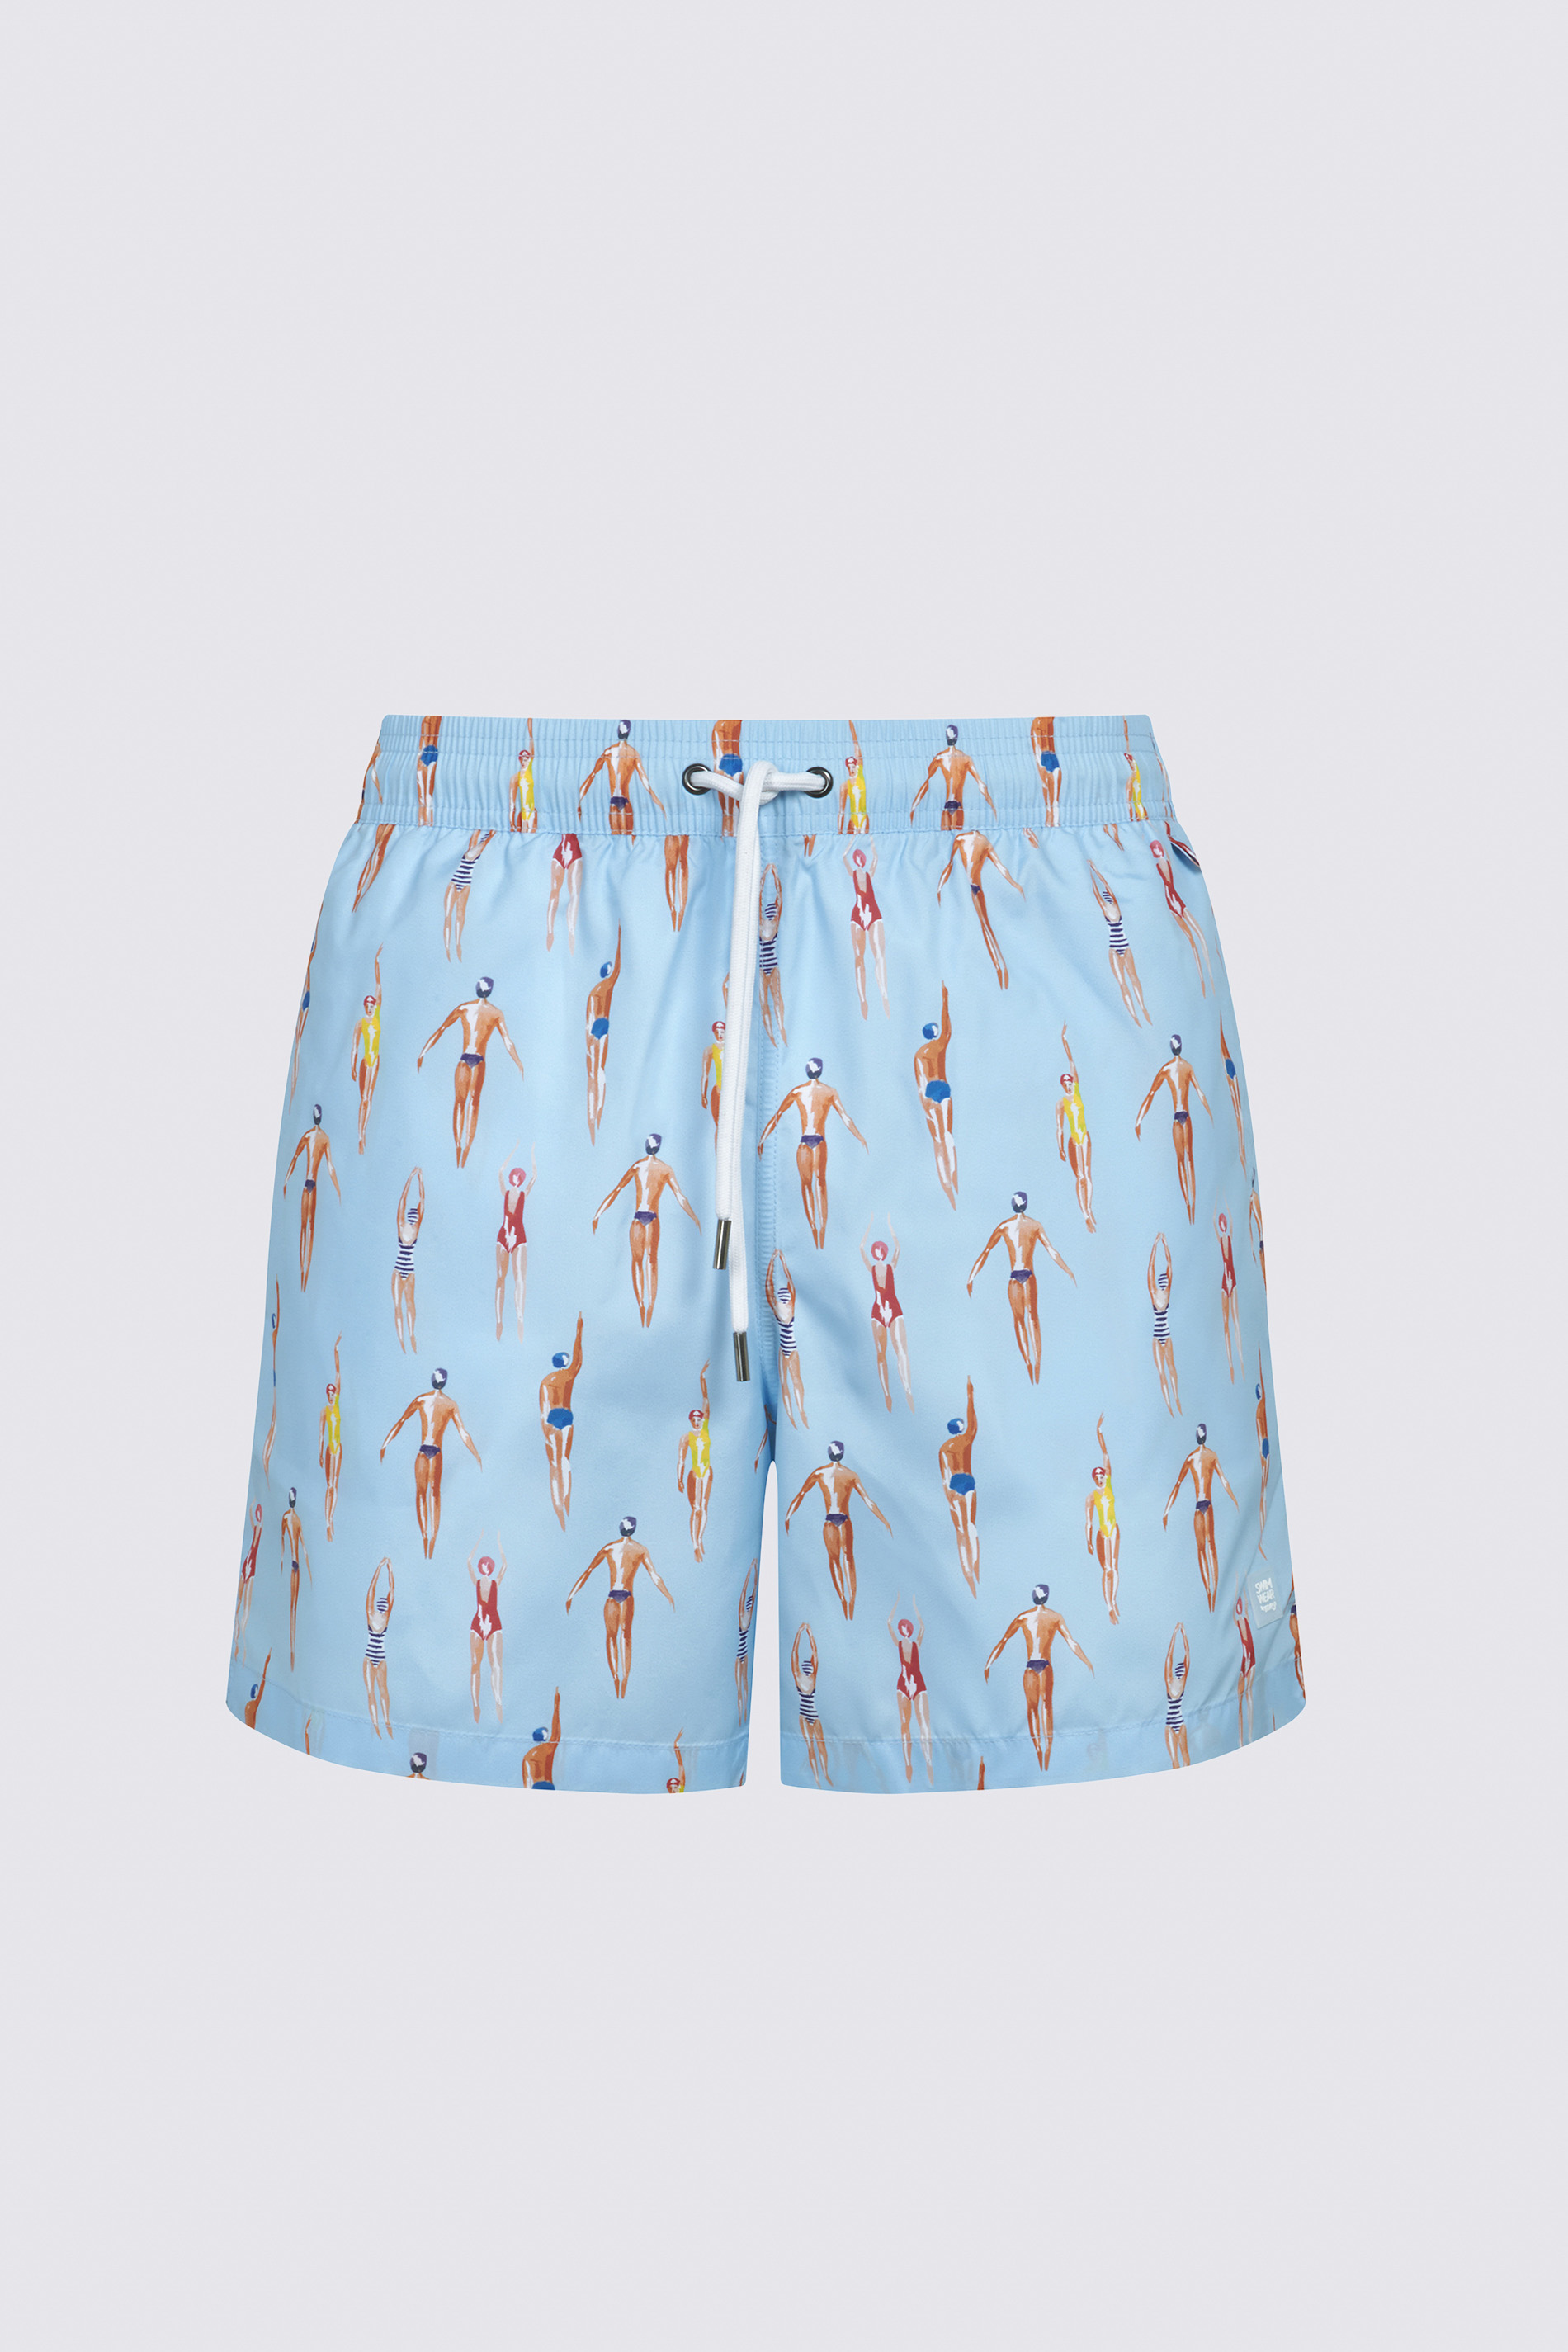 Zwemshorts Blue Bay Serie Swimers Uitknippen | mey®